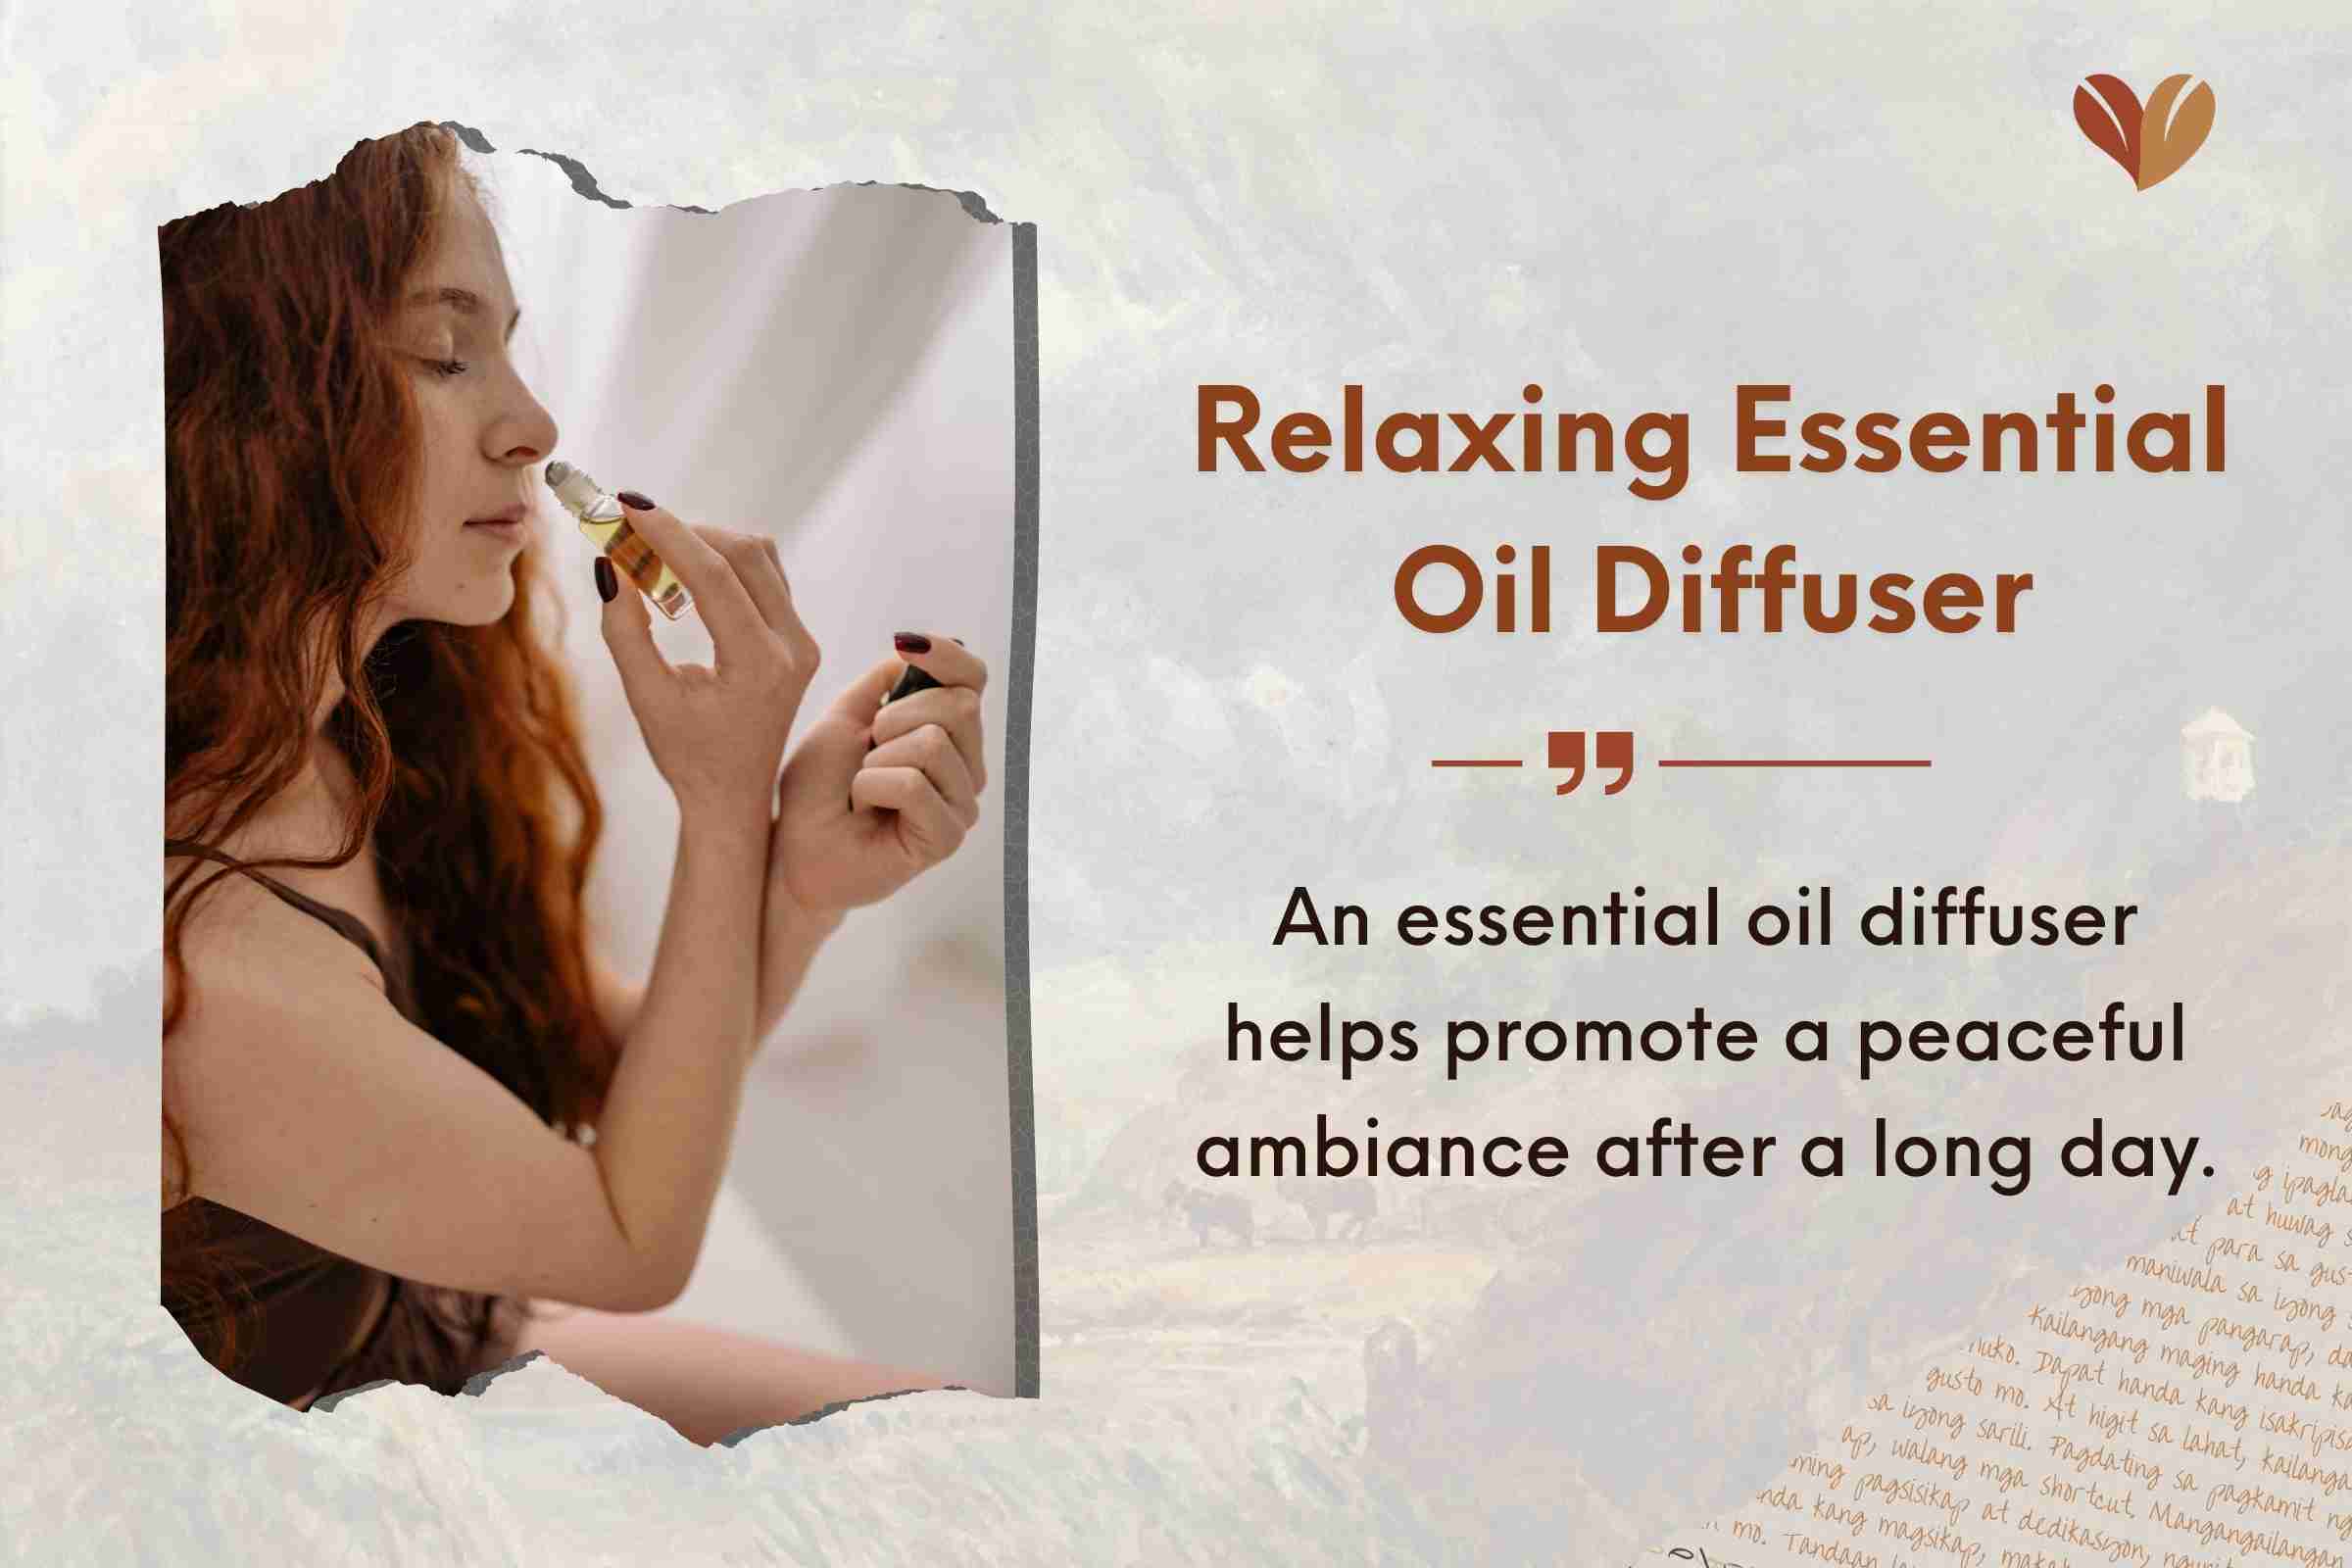 Combine it with essential oils known for their calming properties.